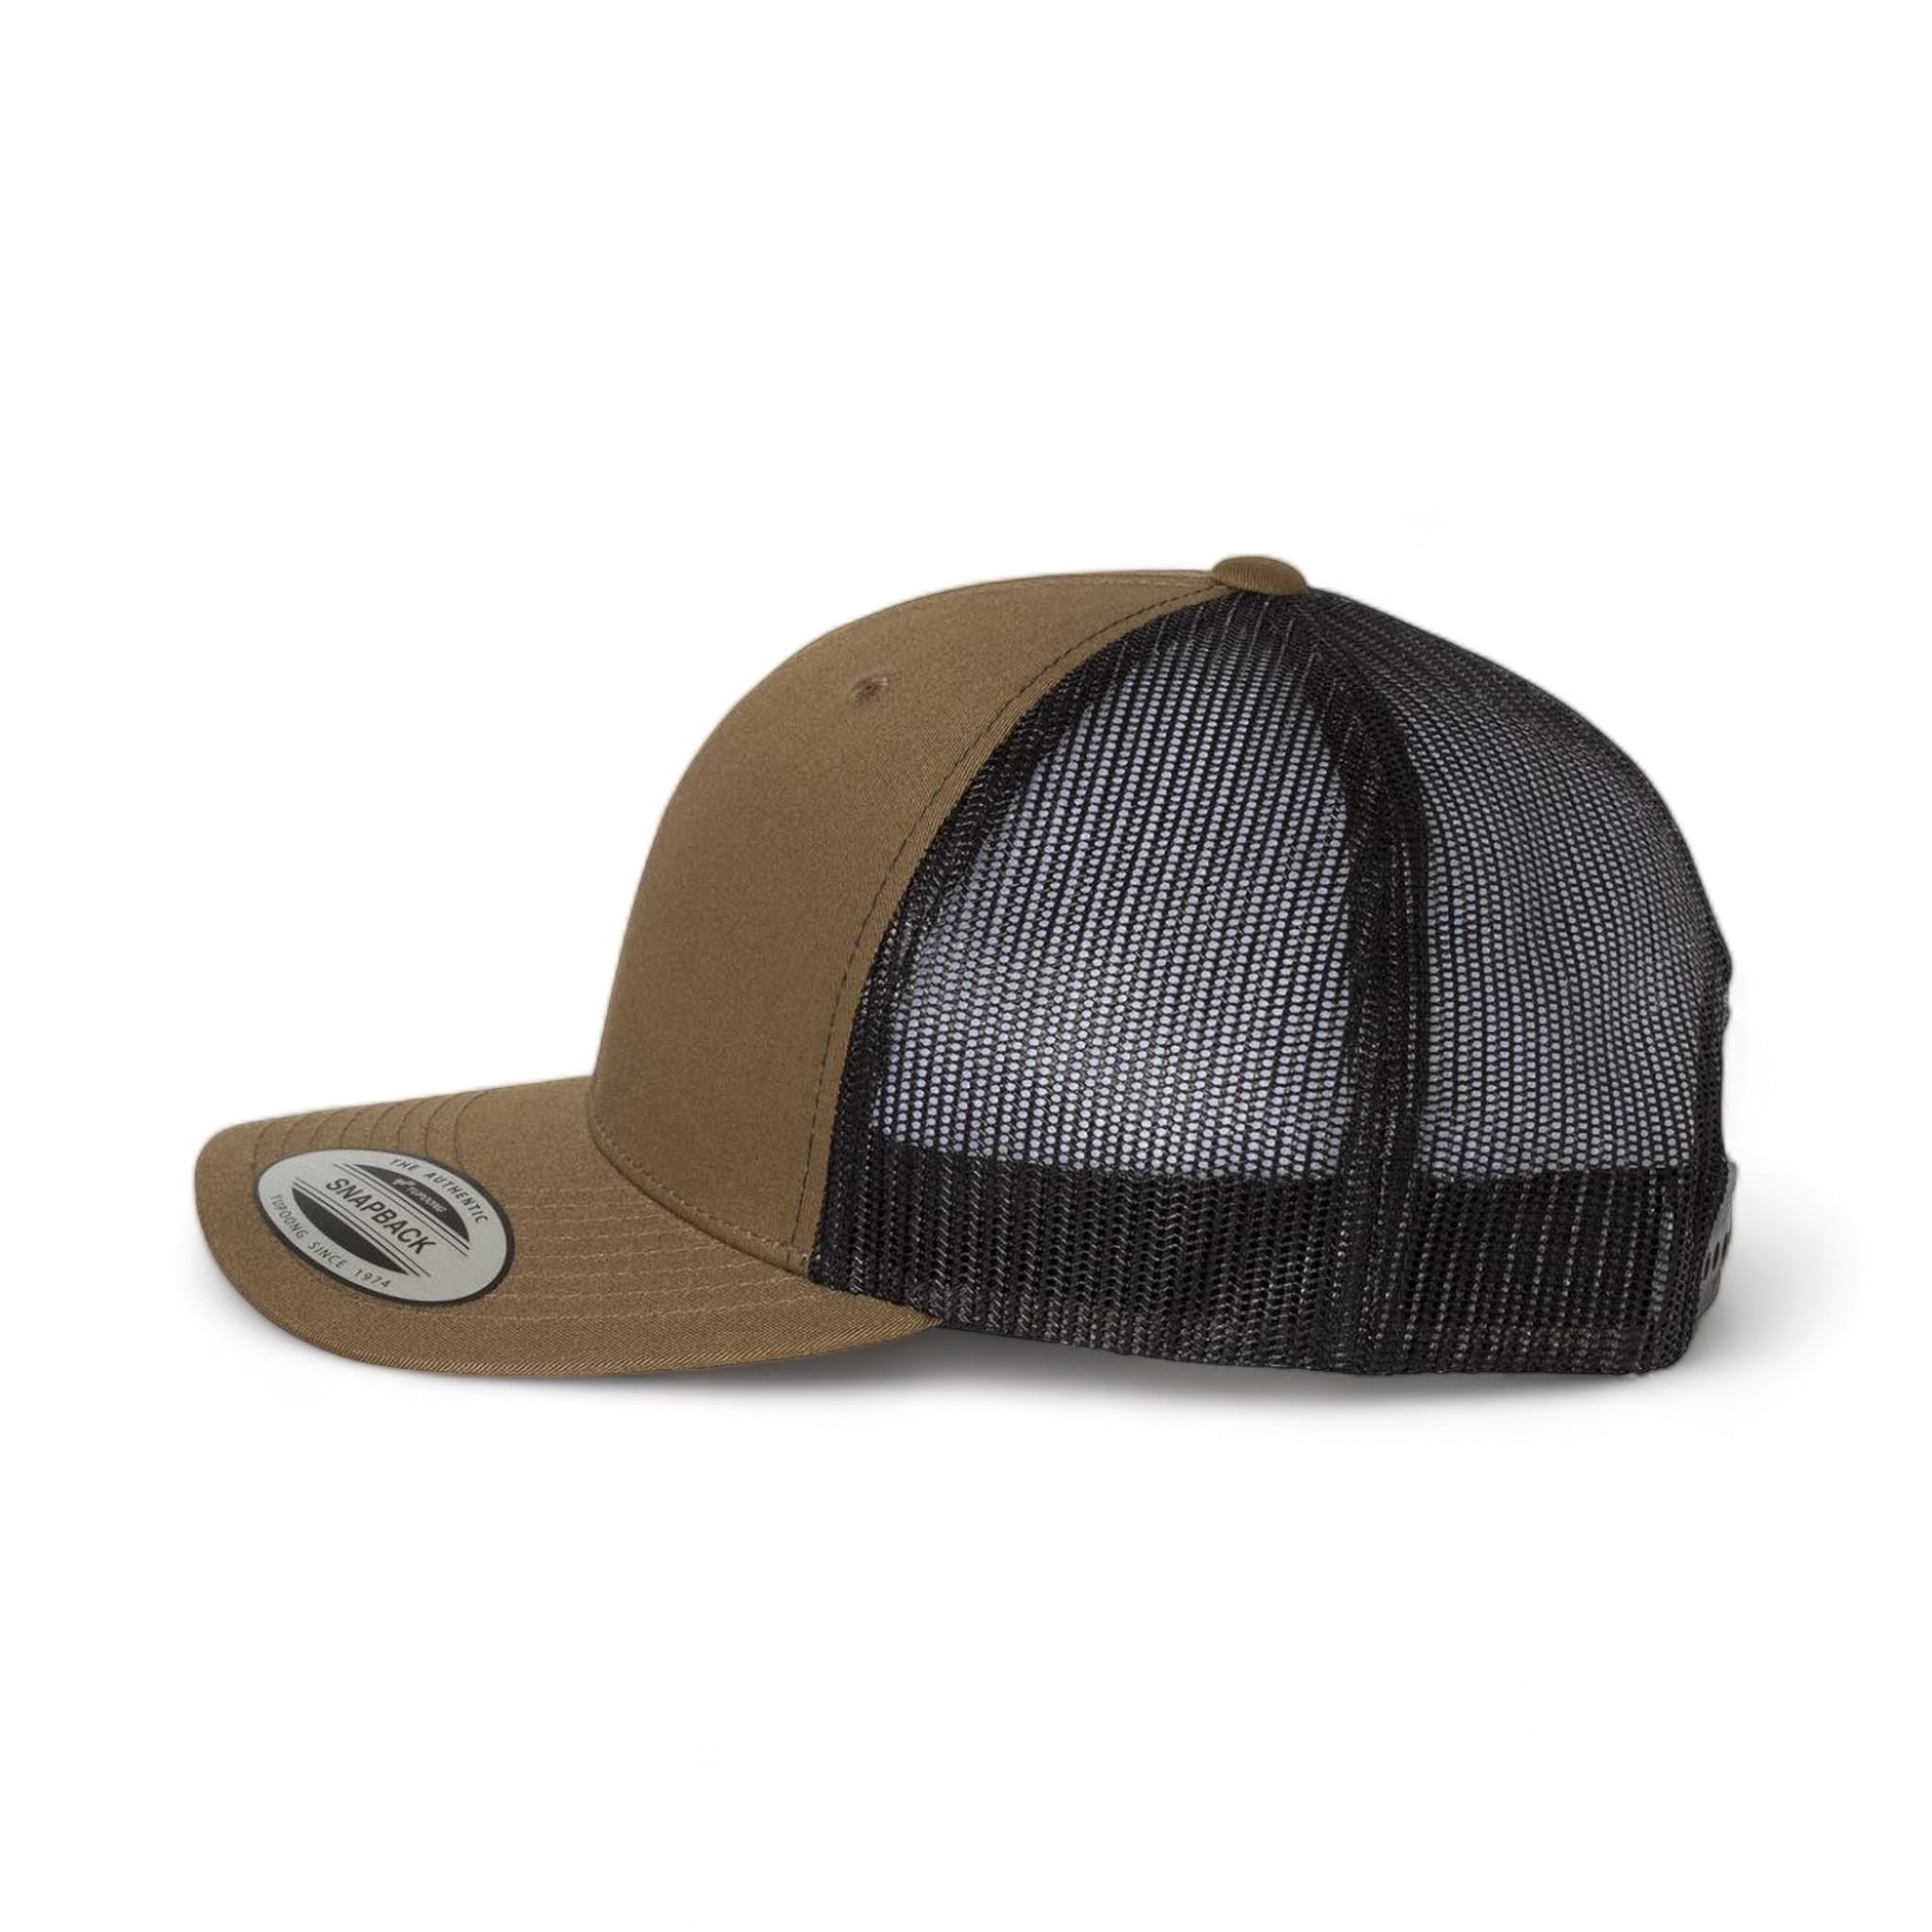 Side view of YP Classics 6606 custom hat in coyote brown and black